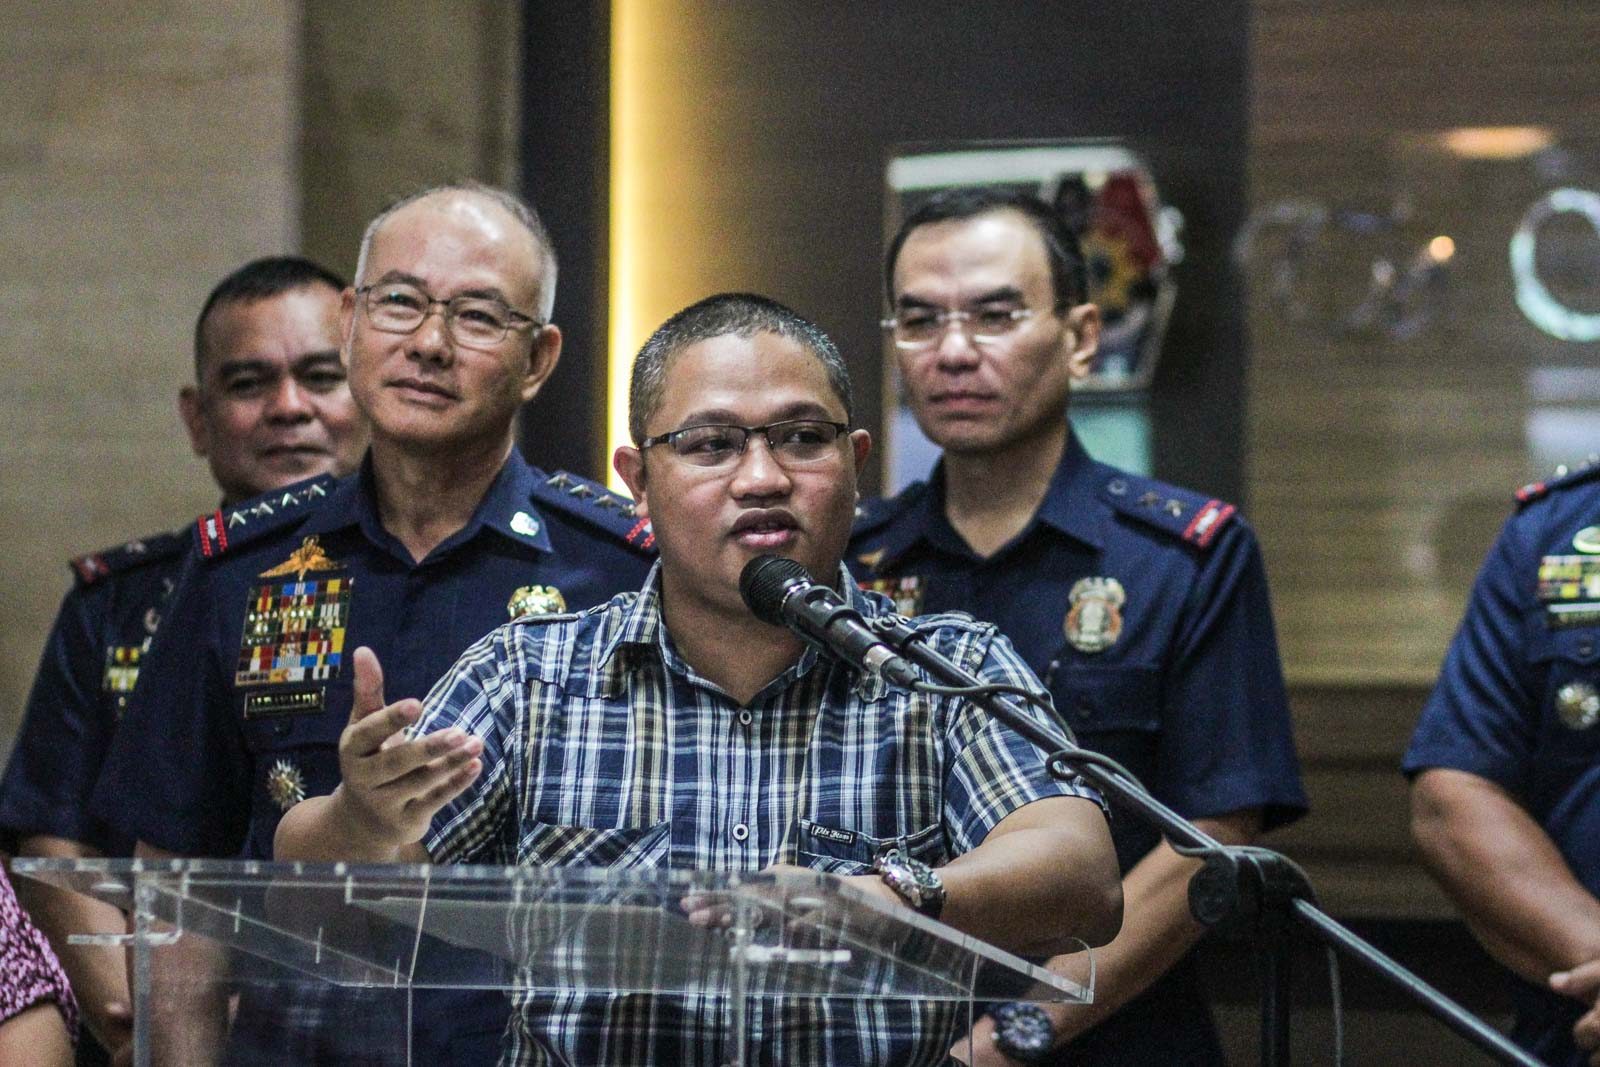 After calling him a liar, PNP hosts Bikoy’s press briefing